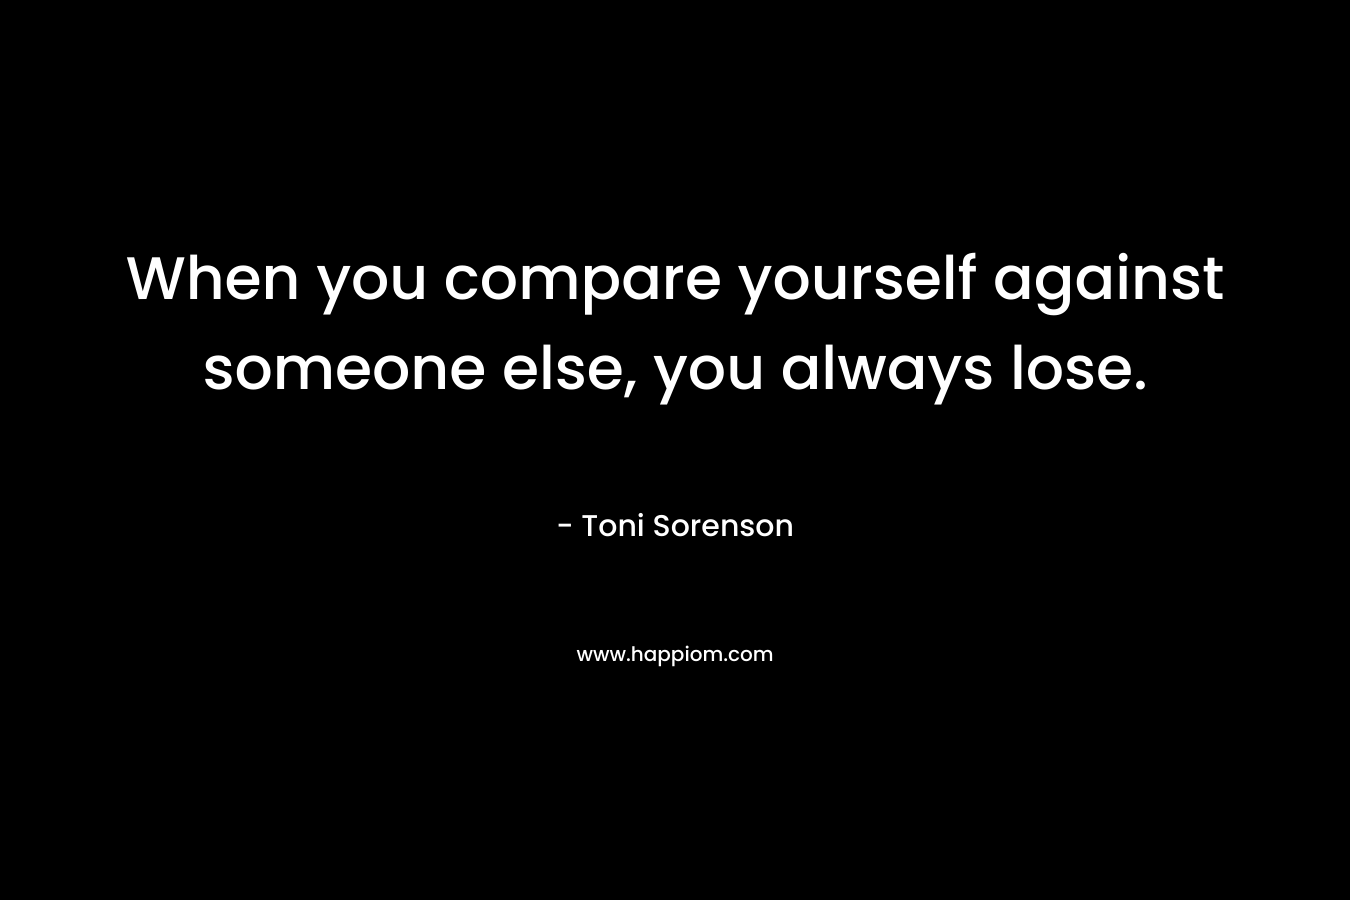 When you compare yourself against someone else, you always lose.